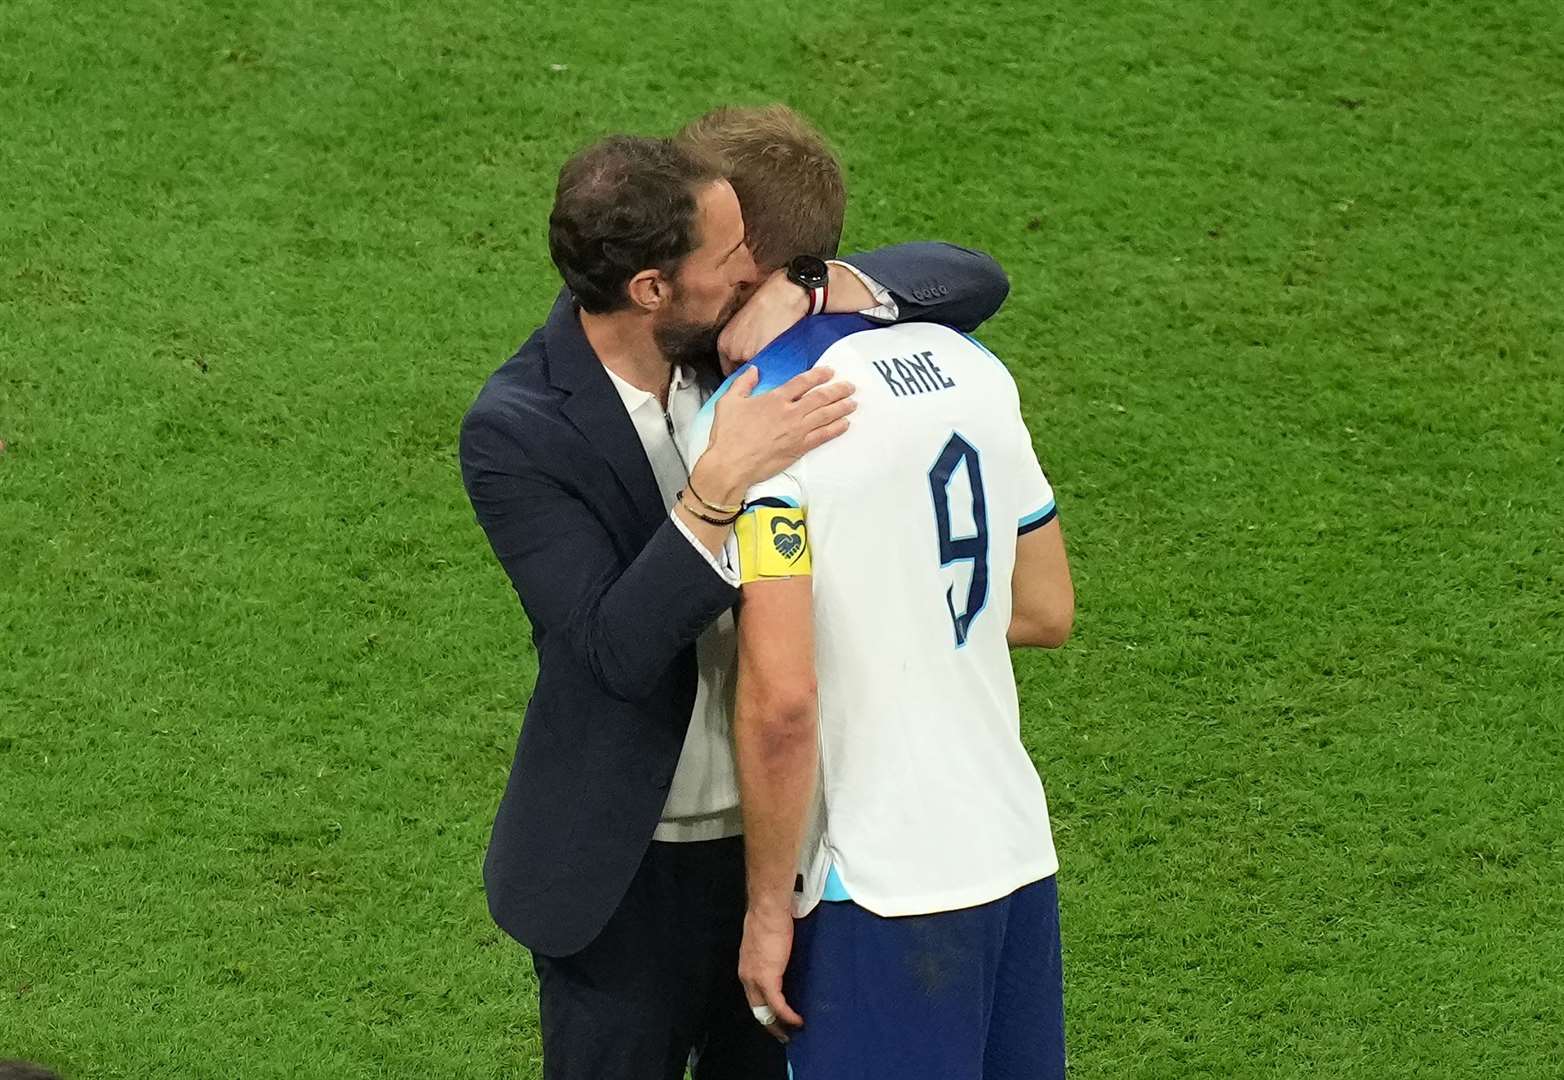 England manager Gareth Southgate consoles Harry Kane following the FIFA World Cup Quarter-Final match at the Al Bayt Stadium in Al Khor, Qatar (Peter Byrne/PA)